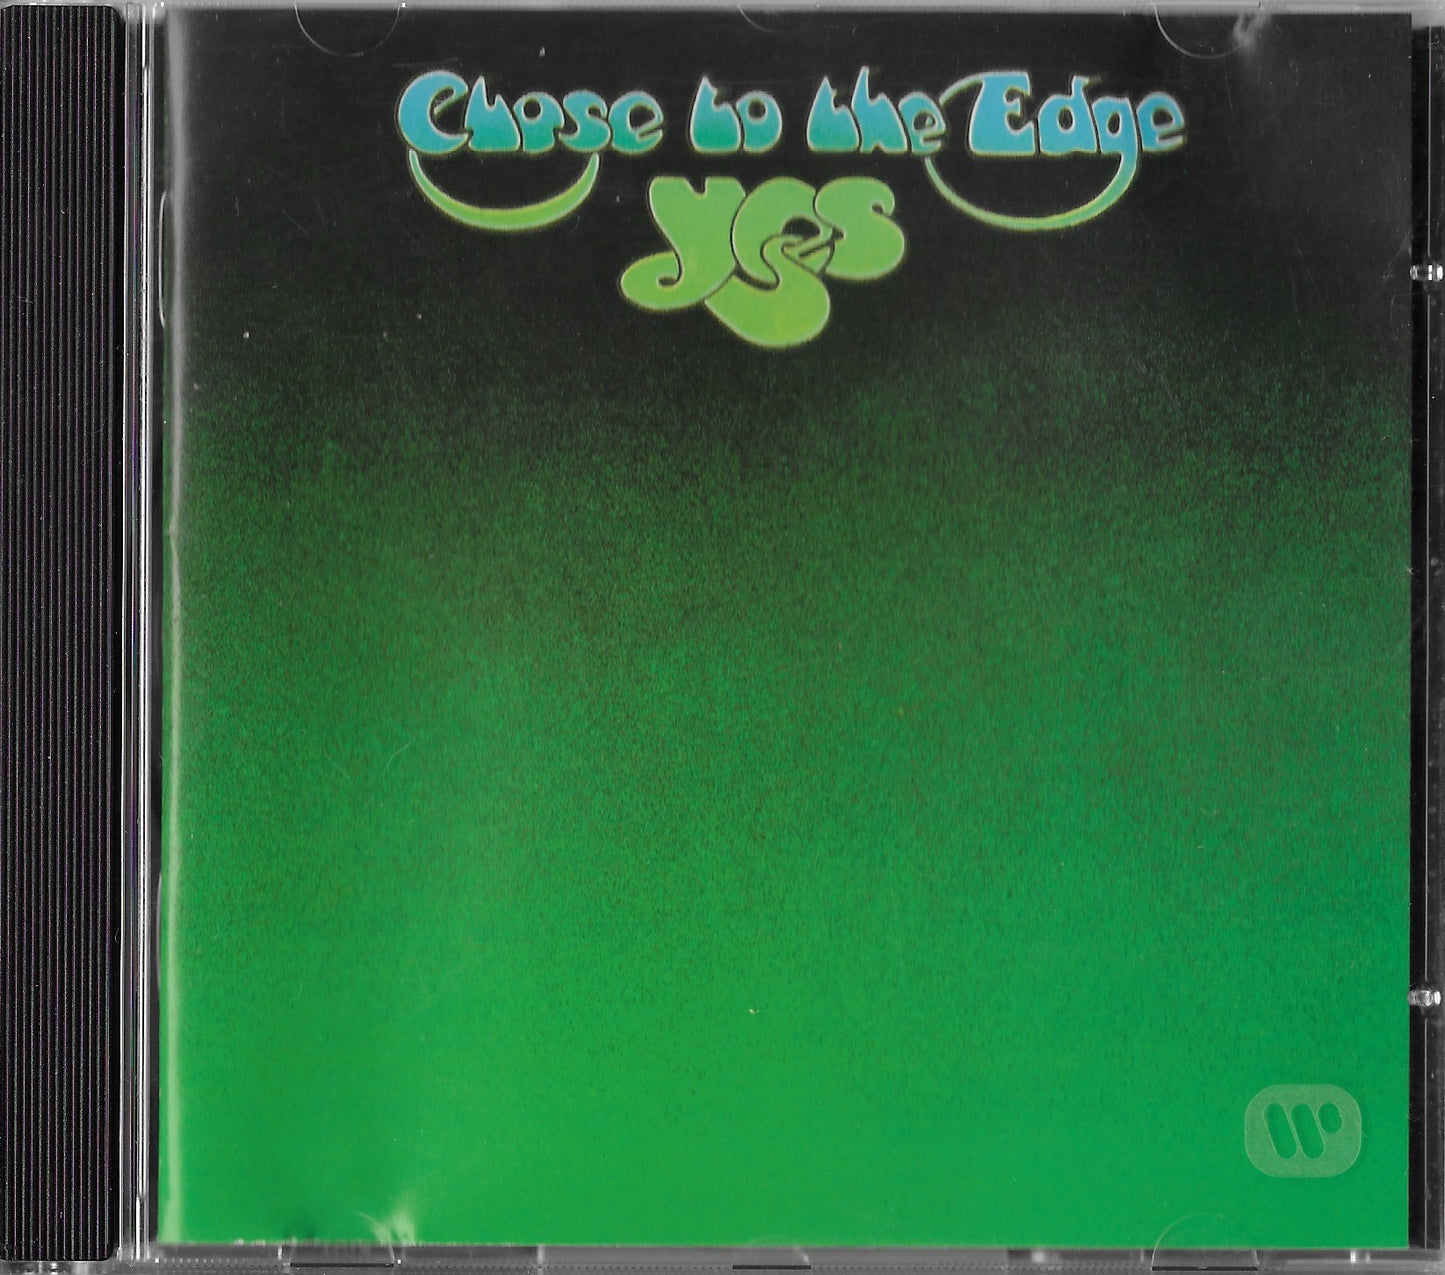 YES - Close To The Edge